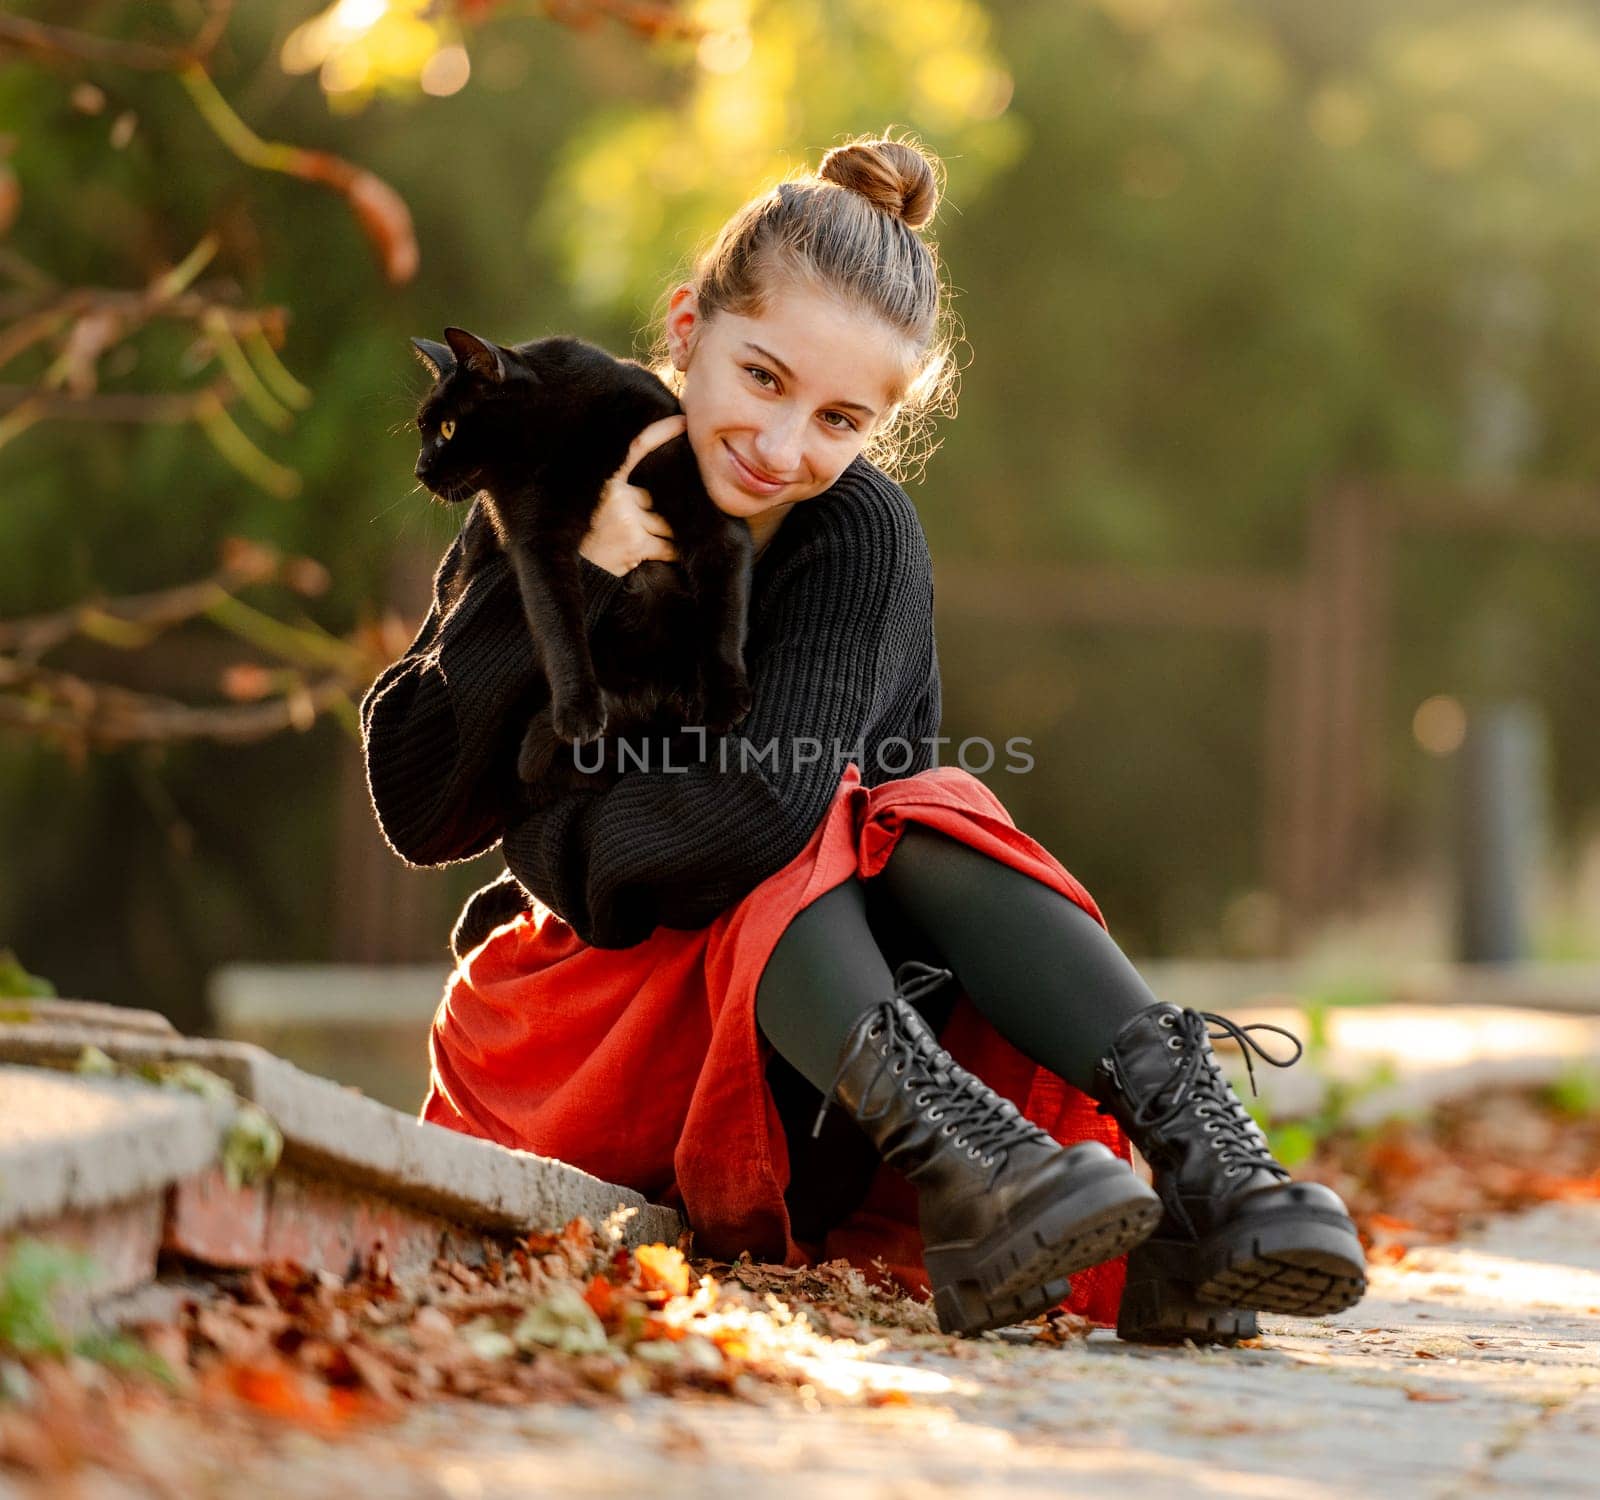 Pretty girl in red skirt hugging black cat outdoors at street with autumn leaves. Beautiful model teenager sitting with feline animal at park